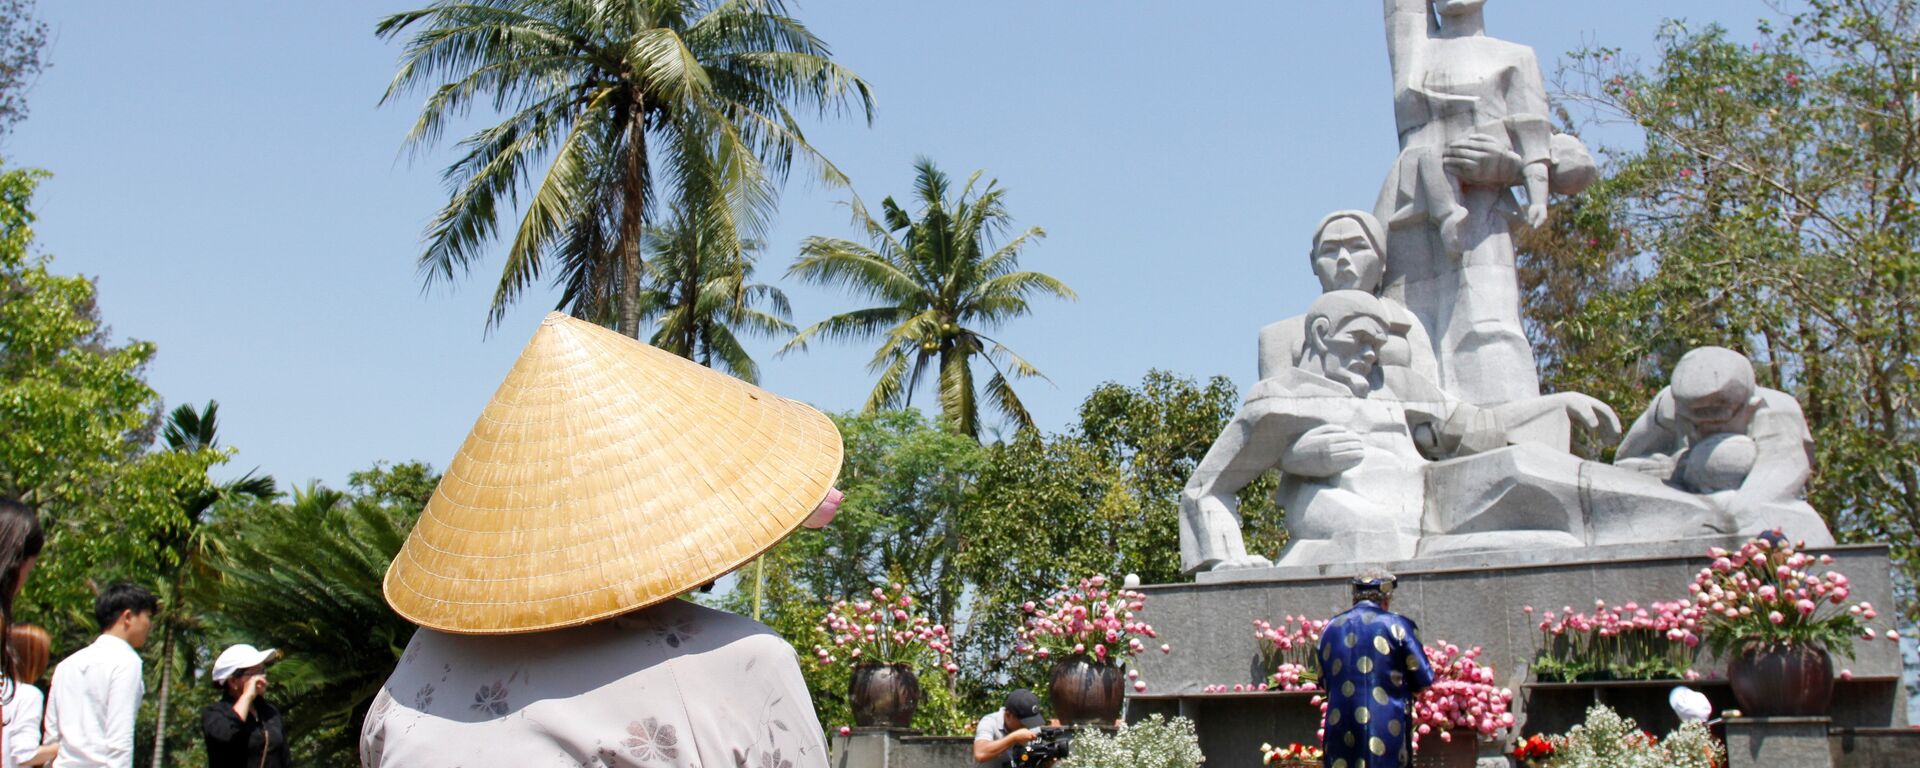 Visitors offer flowers at a war memorial dedicated to the victims of the My Lai massacre in the village of Son My during a ceremony marking the 50th anniversary of the massacre on March 16, 2018 - Sputnik International, 1920, 16.03.2018